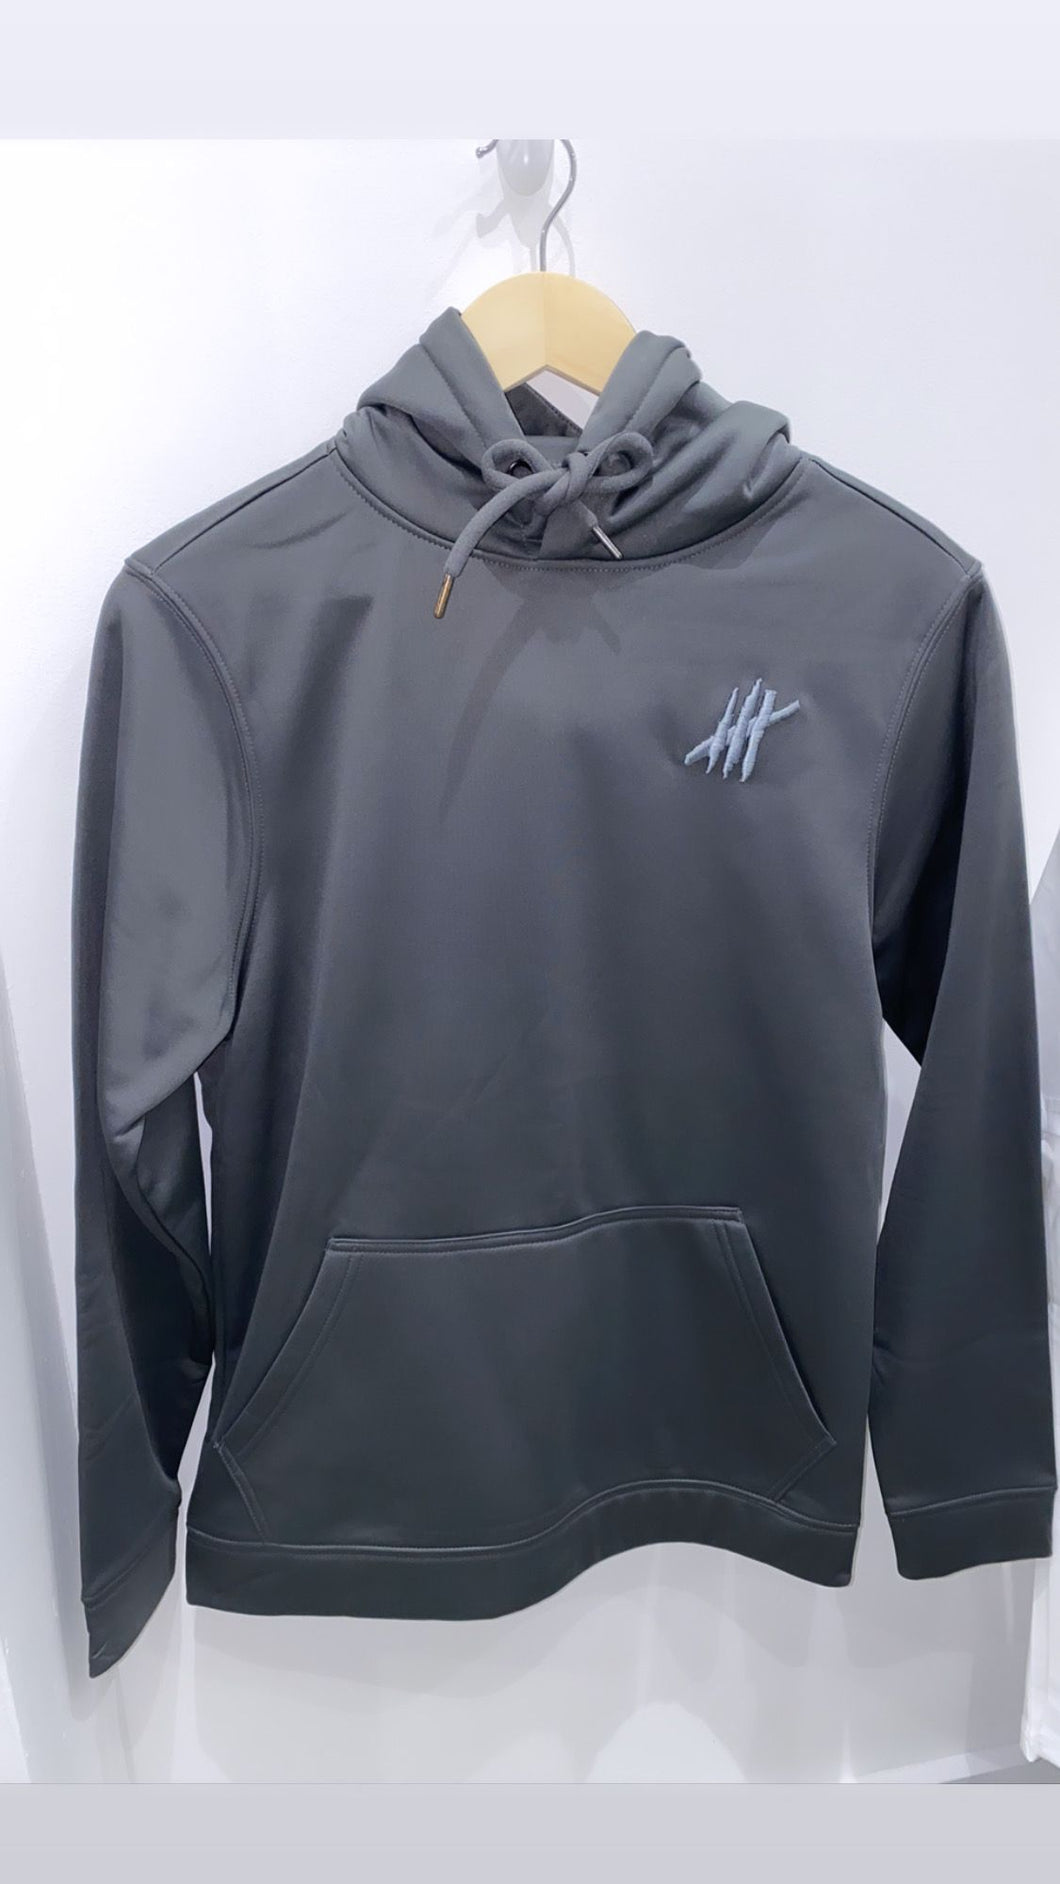 Charcoal sports hoodie with grey logos